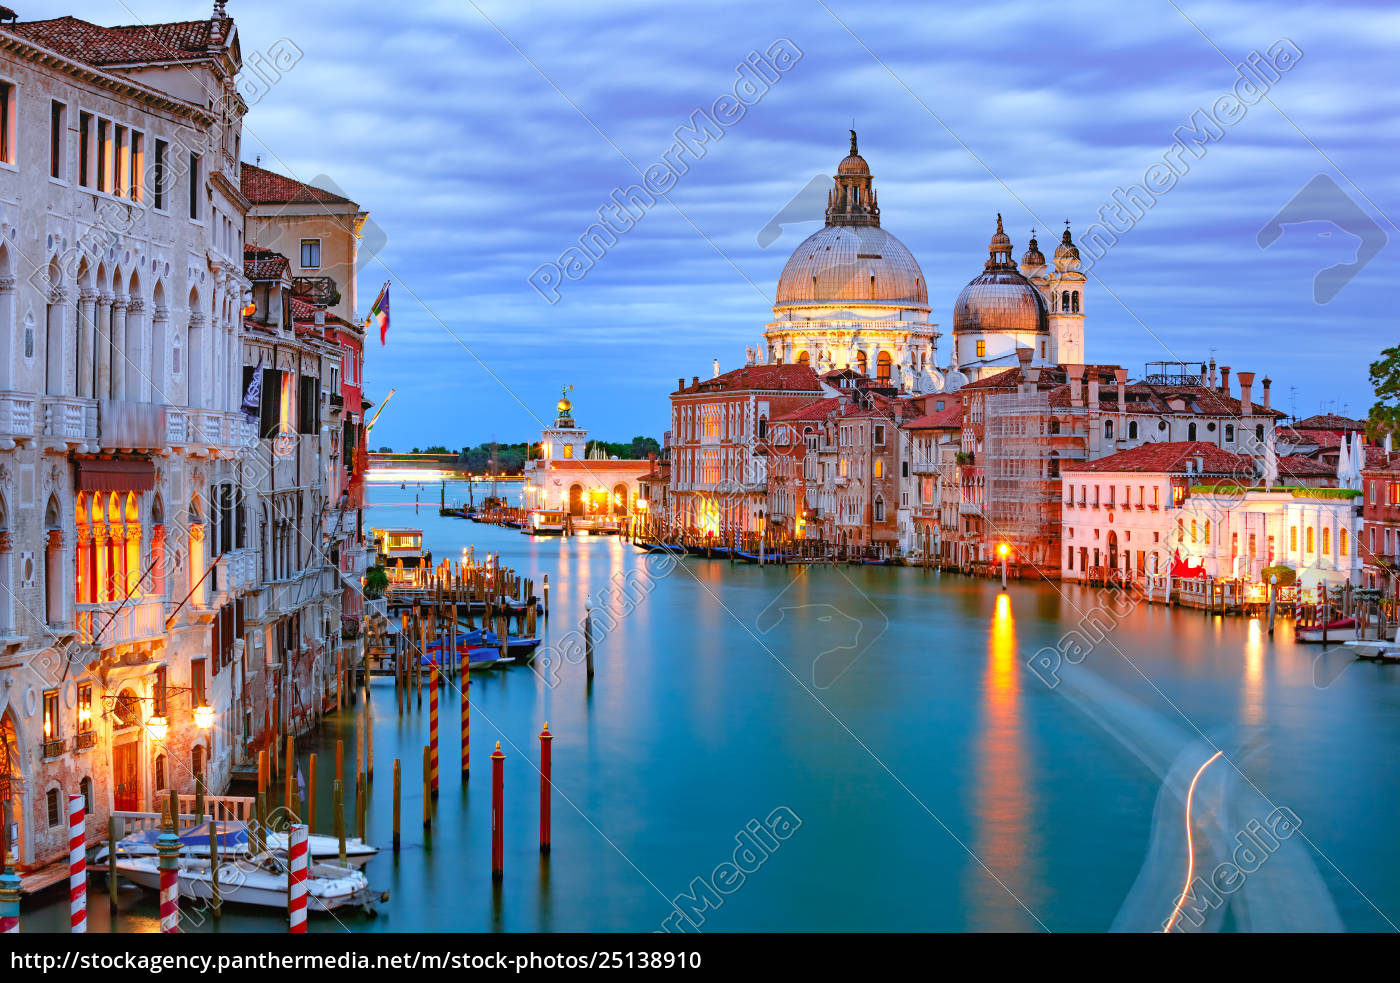 Grand Canal At Night In Venice Italy Stock Image Panthermedia Stock Agency